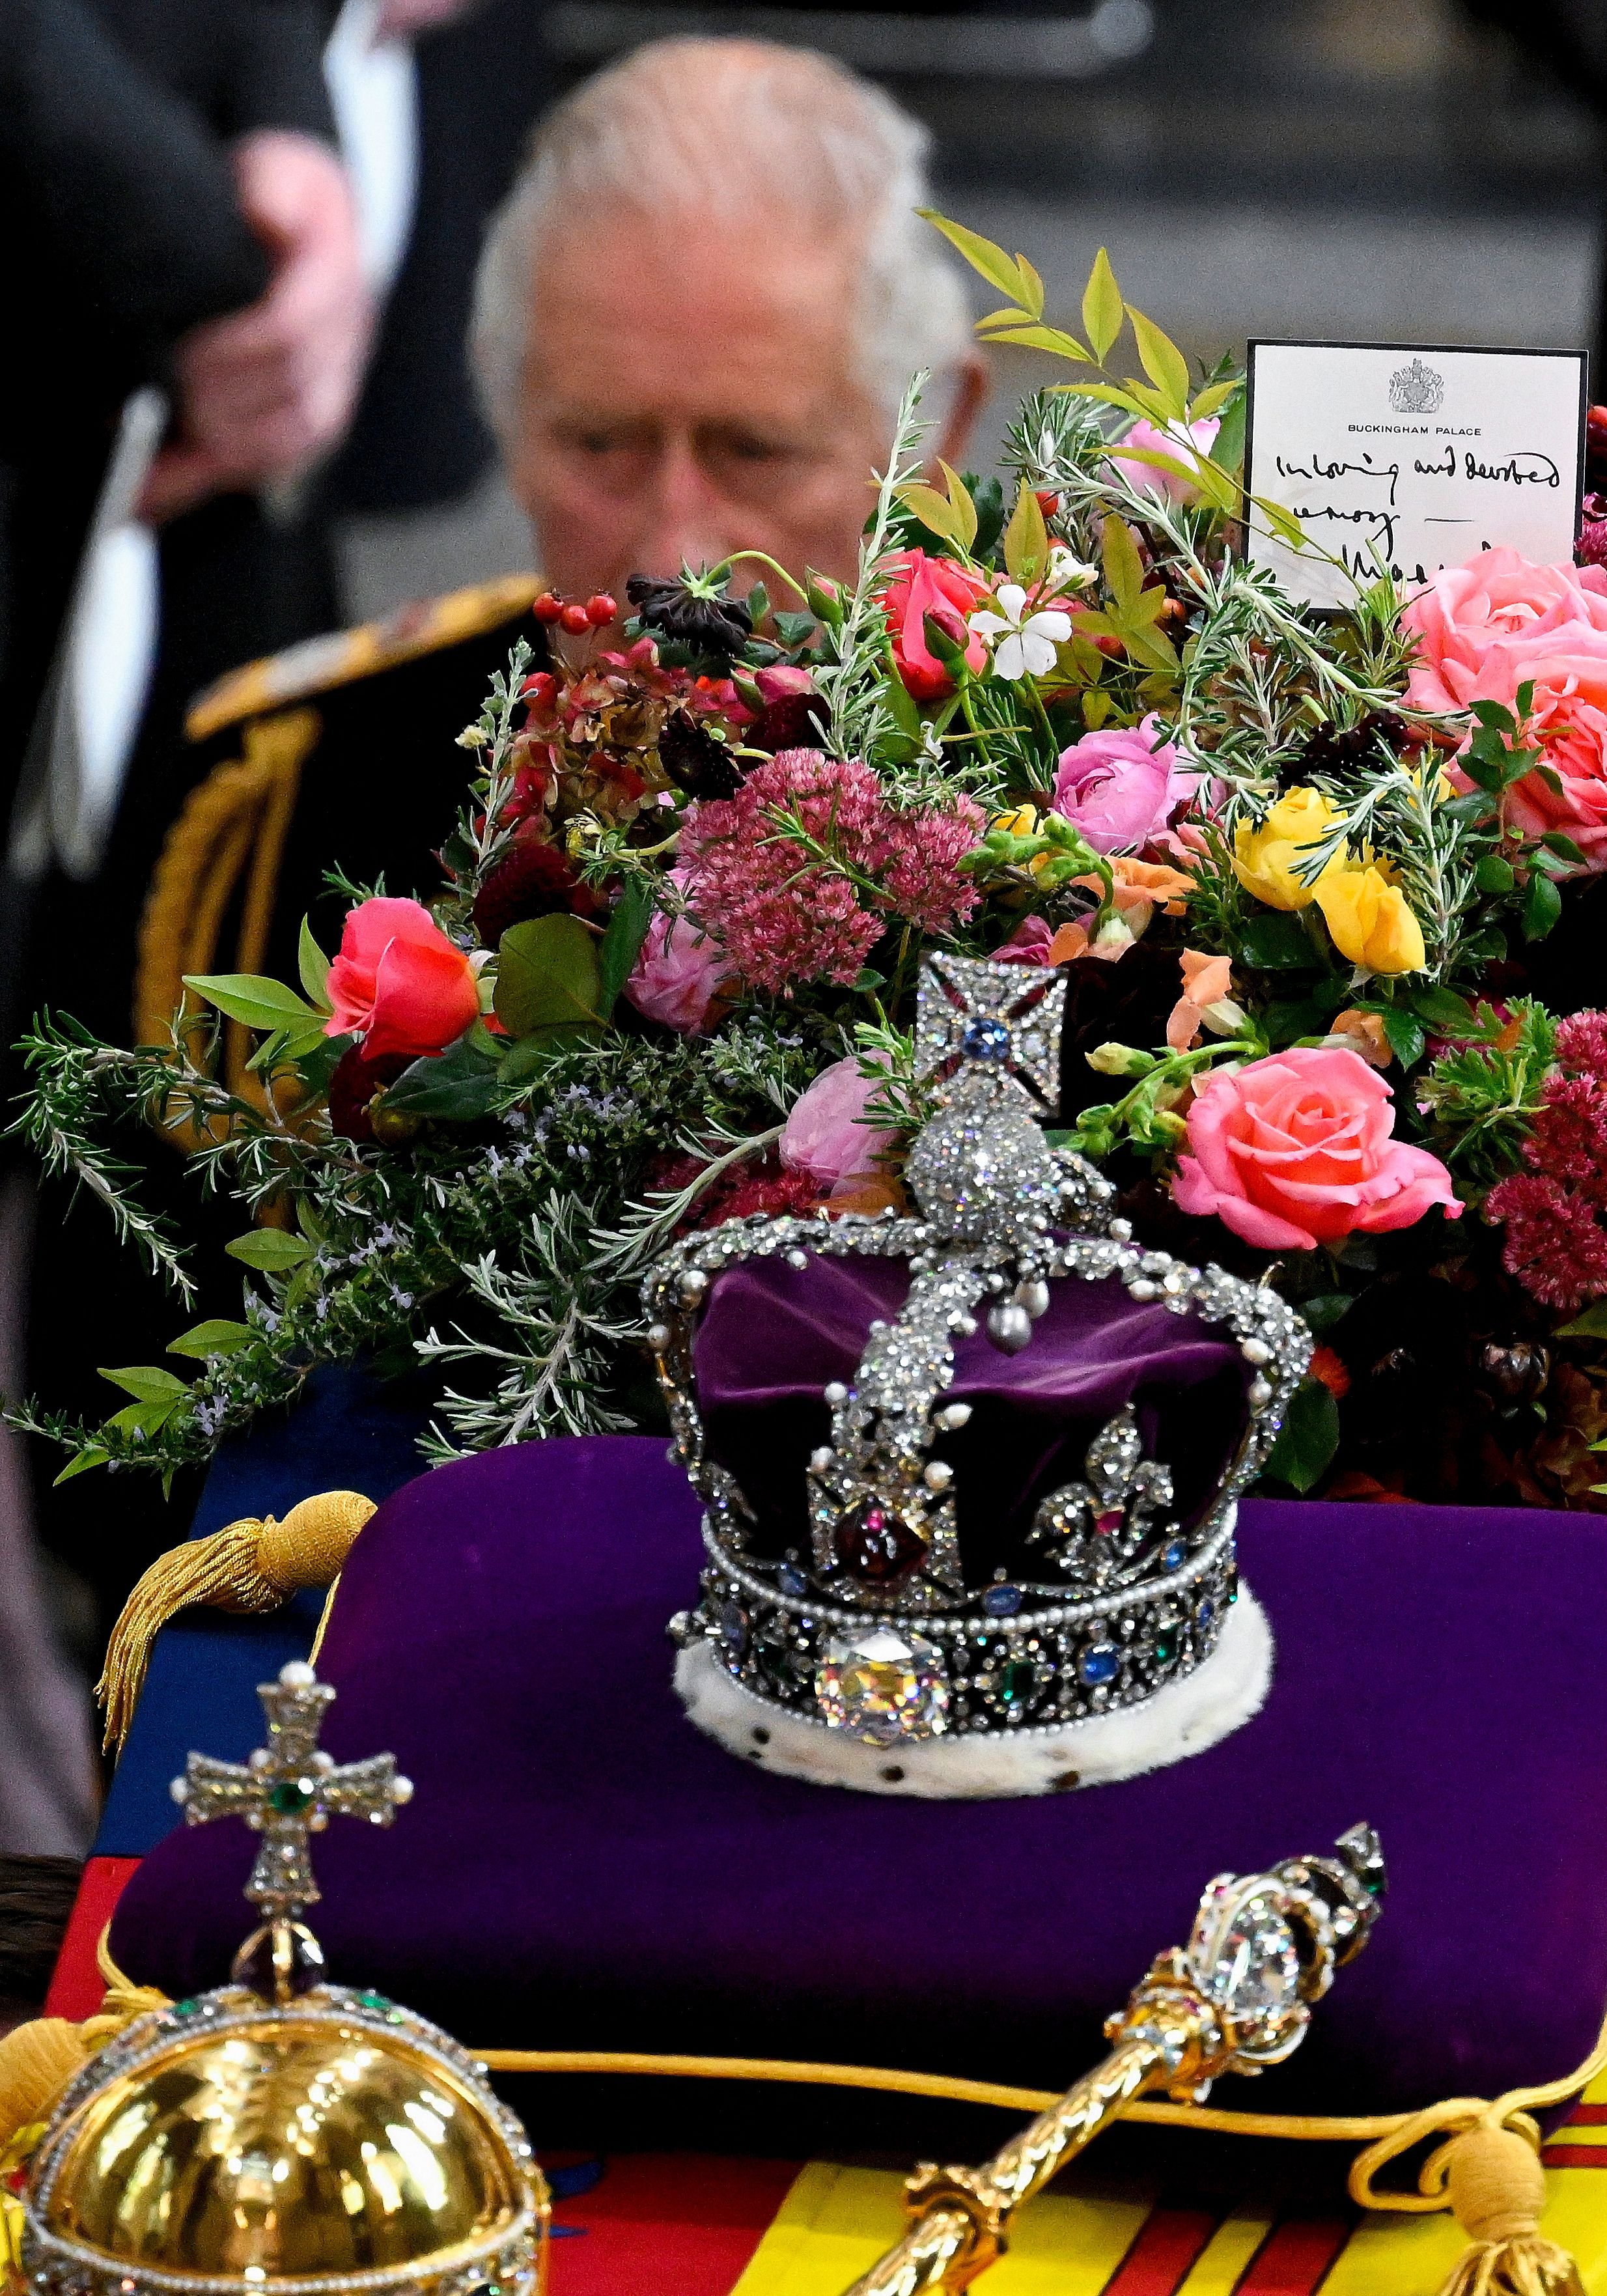 Britain's King Charles III walks behind the coffin of Queen Elizabeth II with the Imperial State Crown resting on top as it departs Westminster Abbey during the State Funeral in London, Britain, September 19, 2022 | Source: Getty Images 